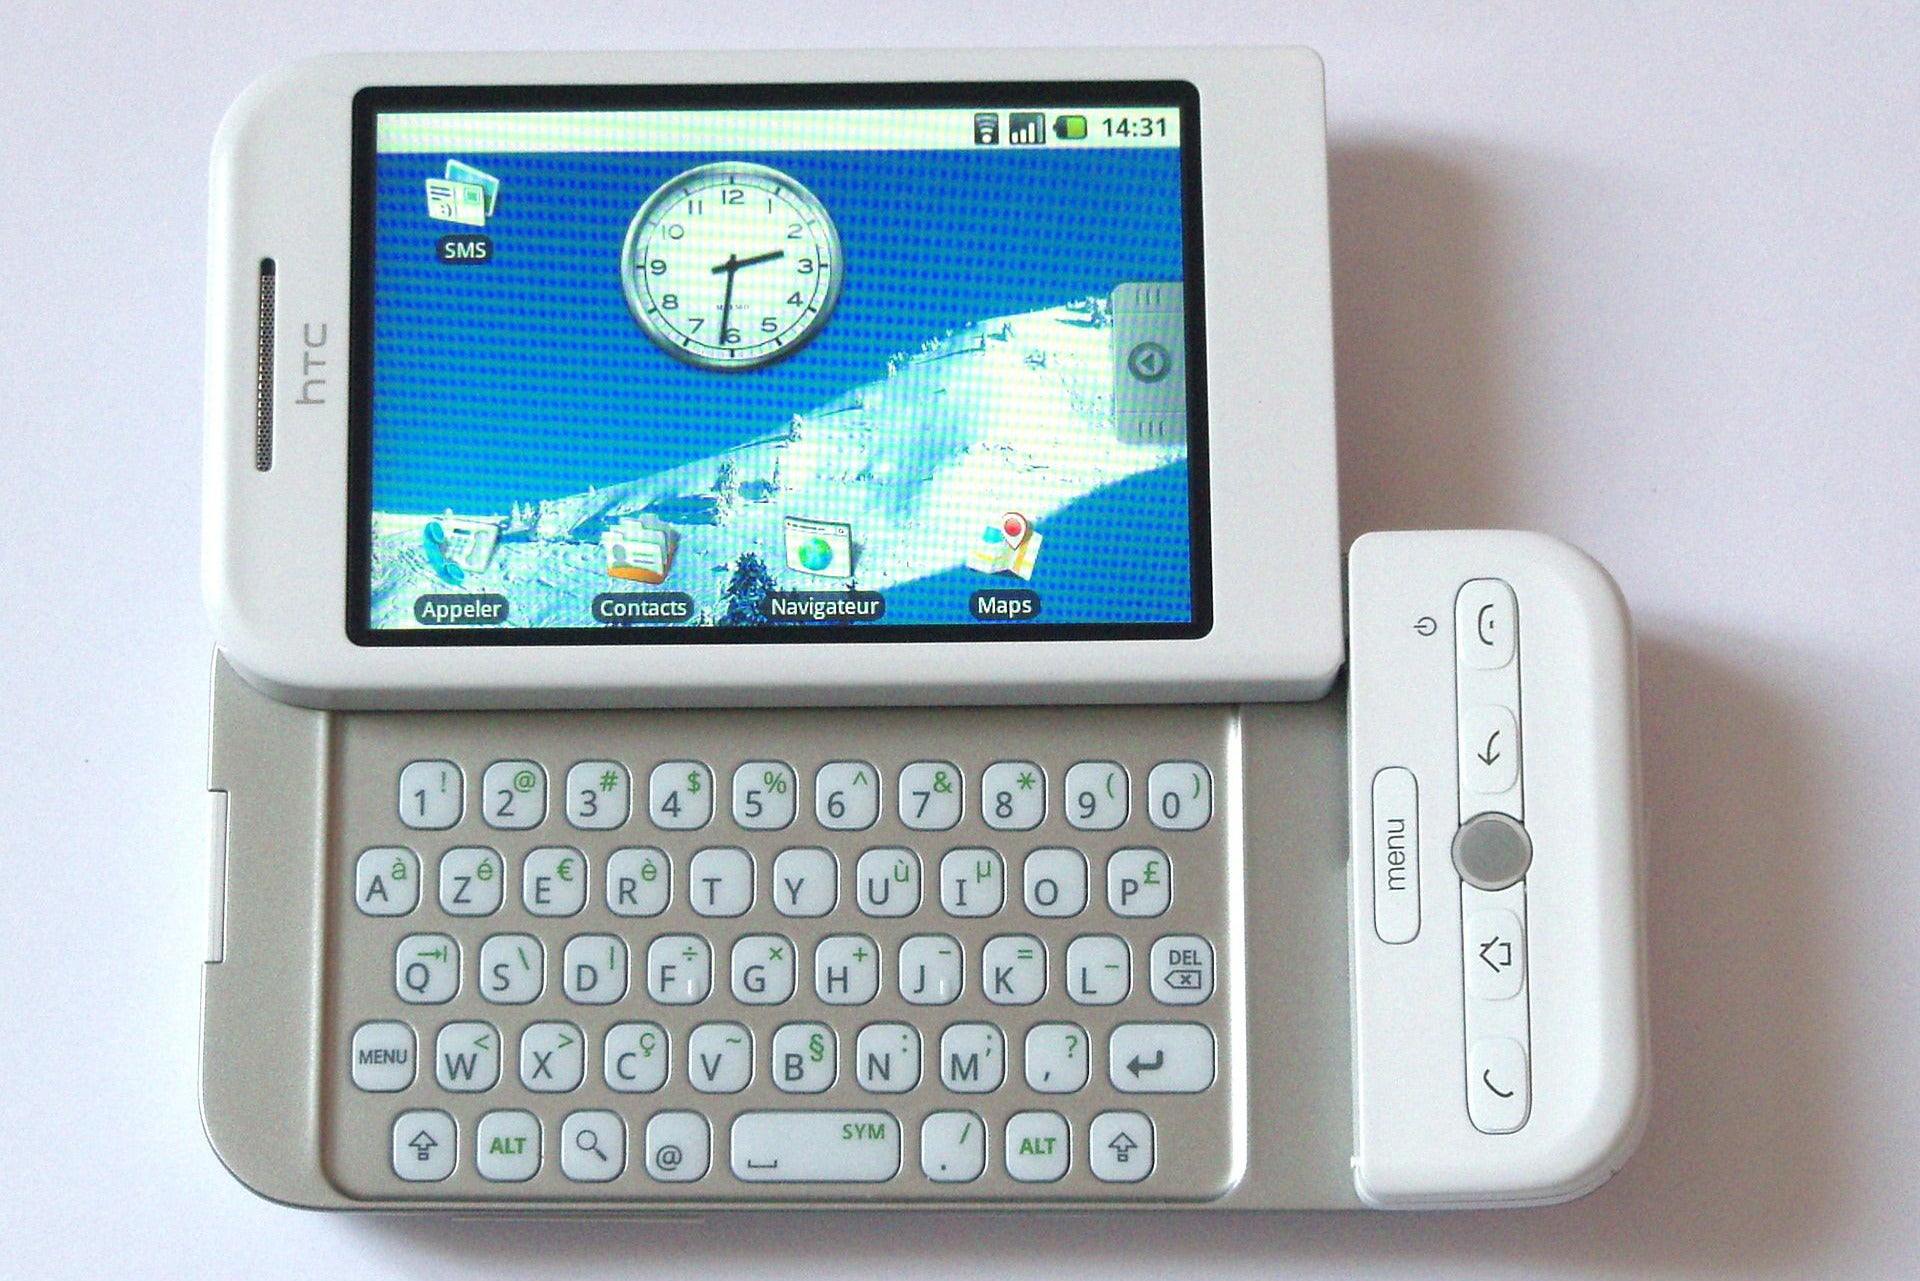 HTC Dream - Legendary HTC prepping to launch a new premium phone?